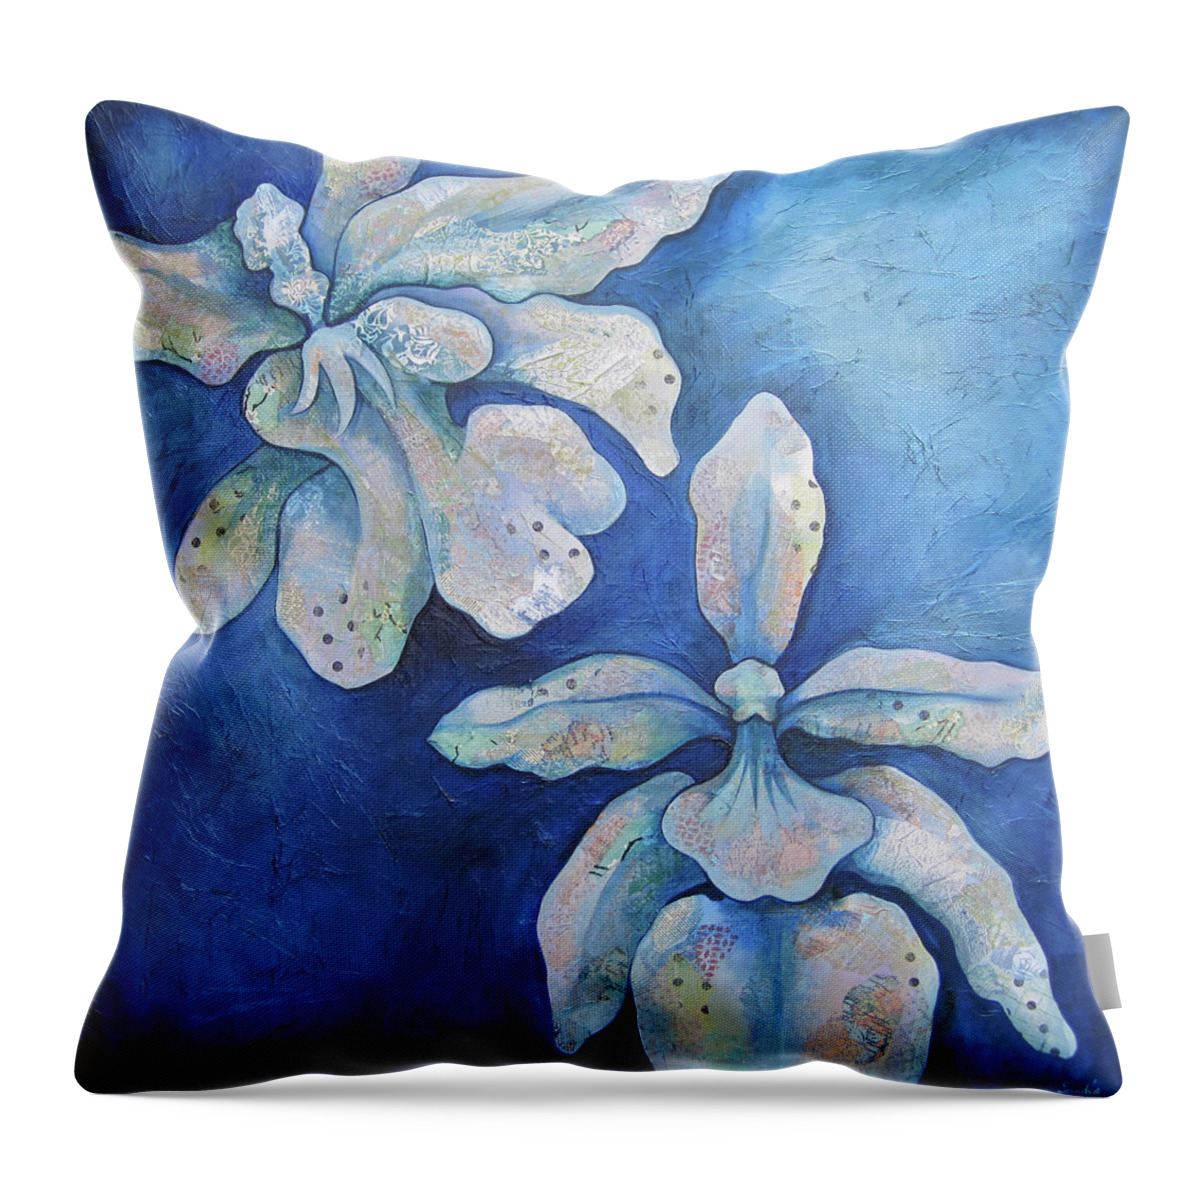 Blue Throw Pillow featuring the painting Floating Orchid by Shadia Derbyshire